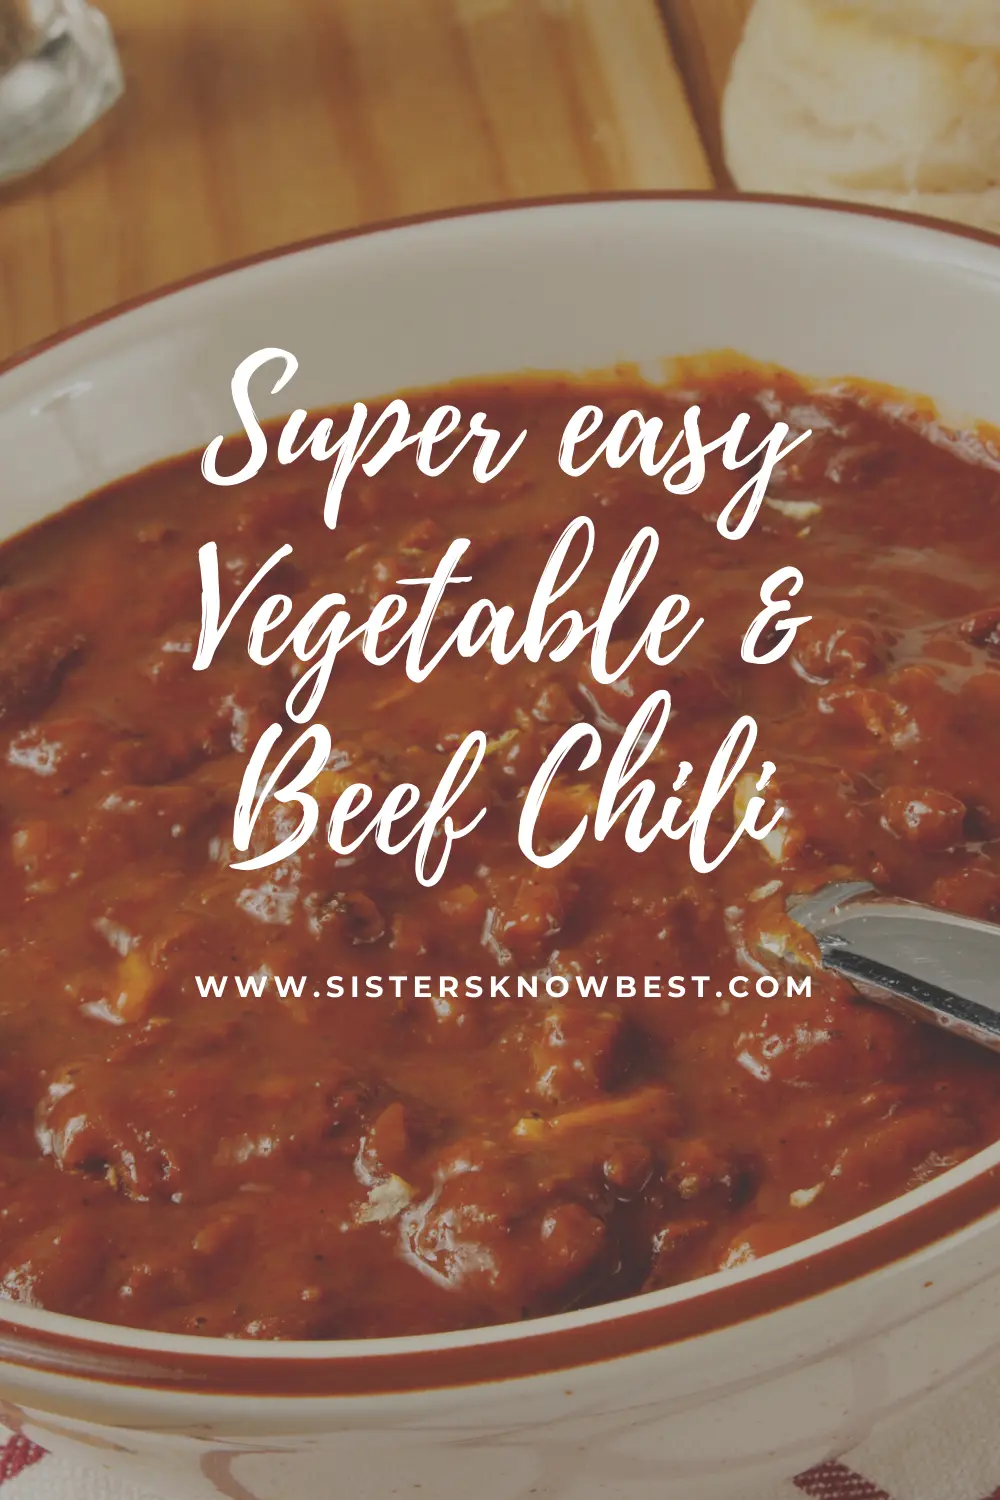 Vegetable and beef chili recipe